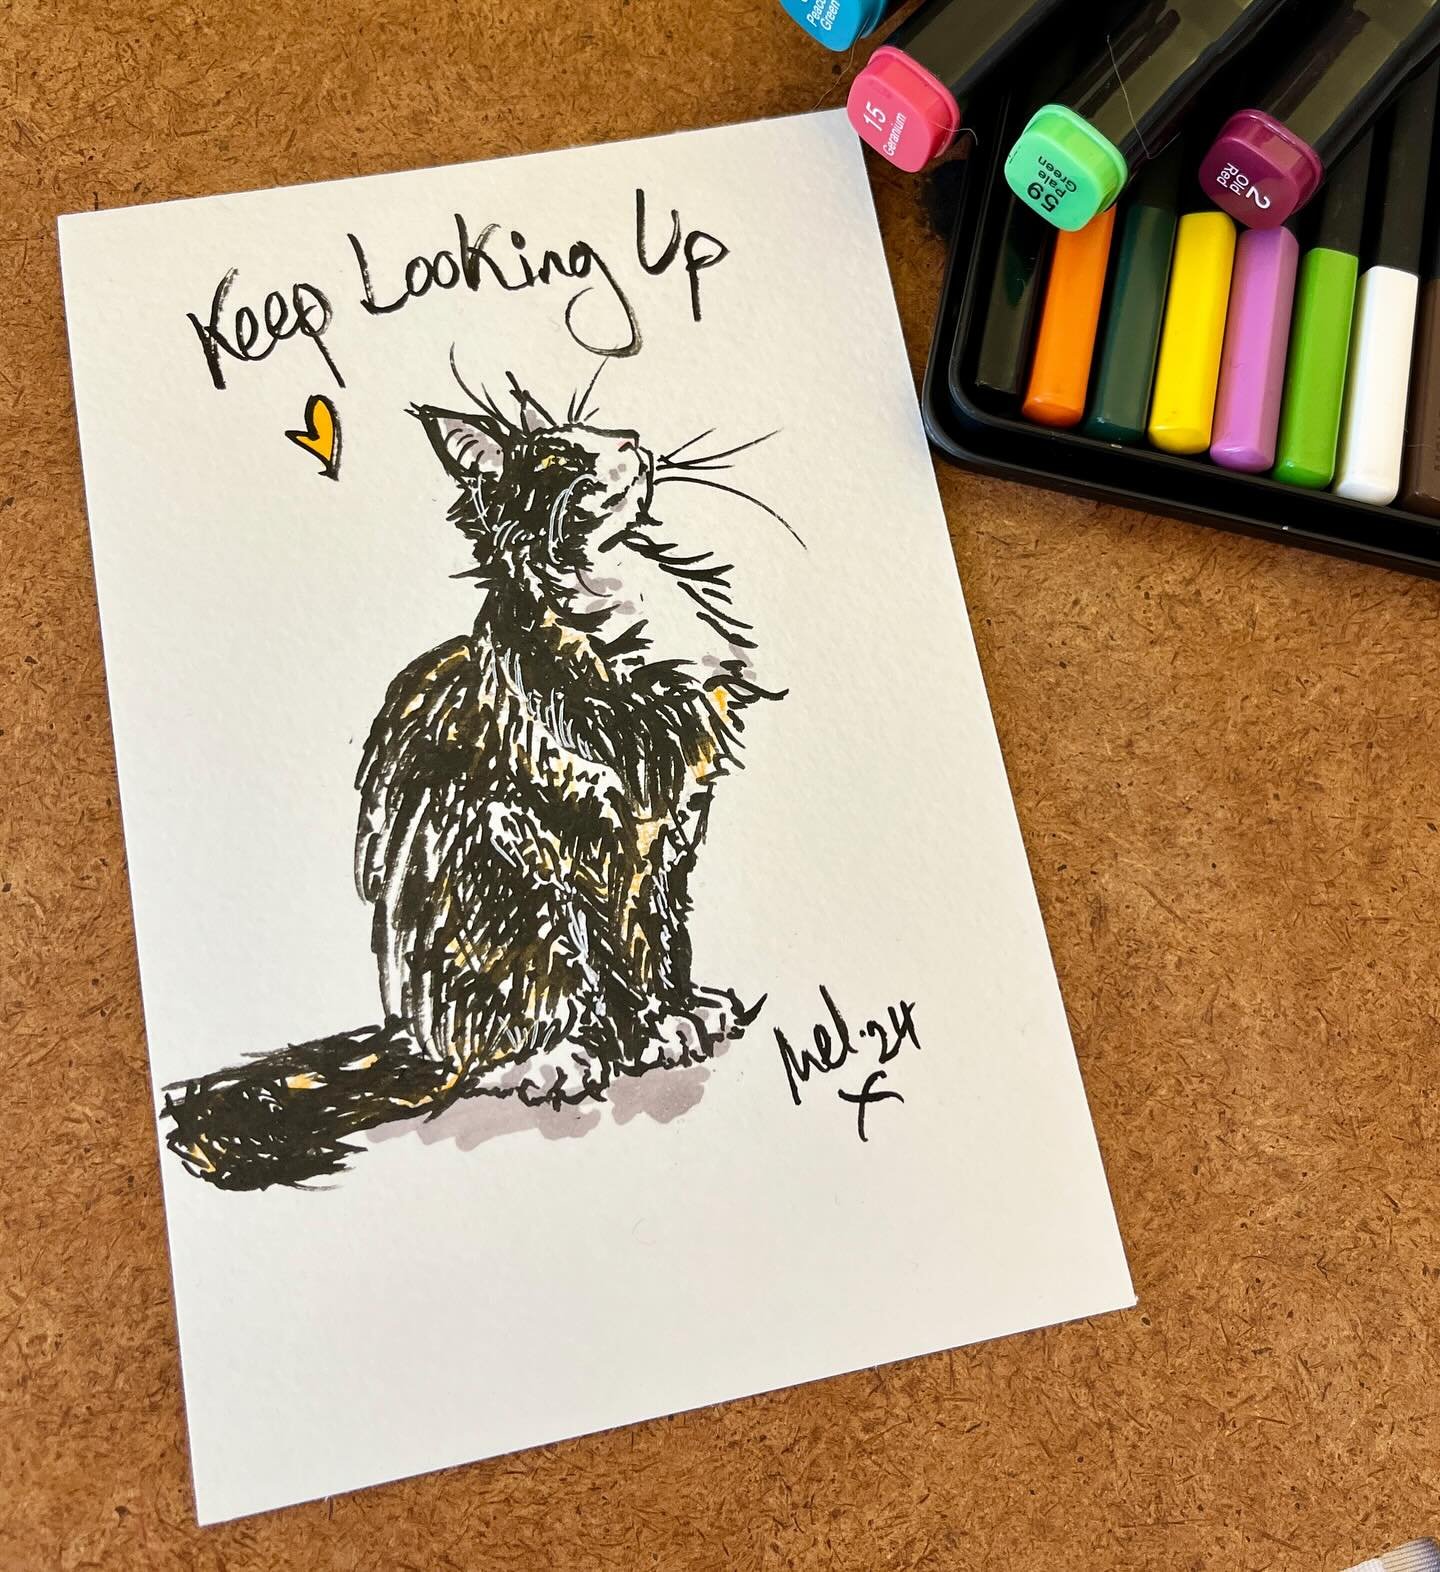 ✨ keep looking up ✨
&bull;
&bull;
I sketched this cute little kitty at the @sallyartistsmakers fair yesterday in Thame. What do you think @blues_fleecircus? 🖋️🐾&hearts;️
&bull;
&bull;
#catsandquotes #art #positivethinking #artist #cat #illustration